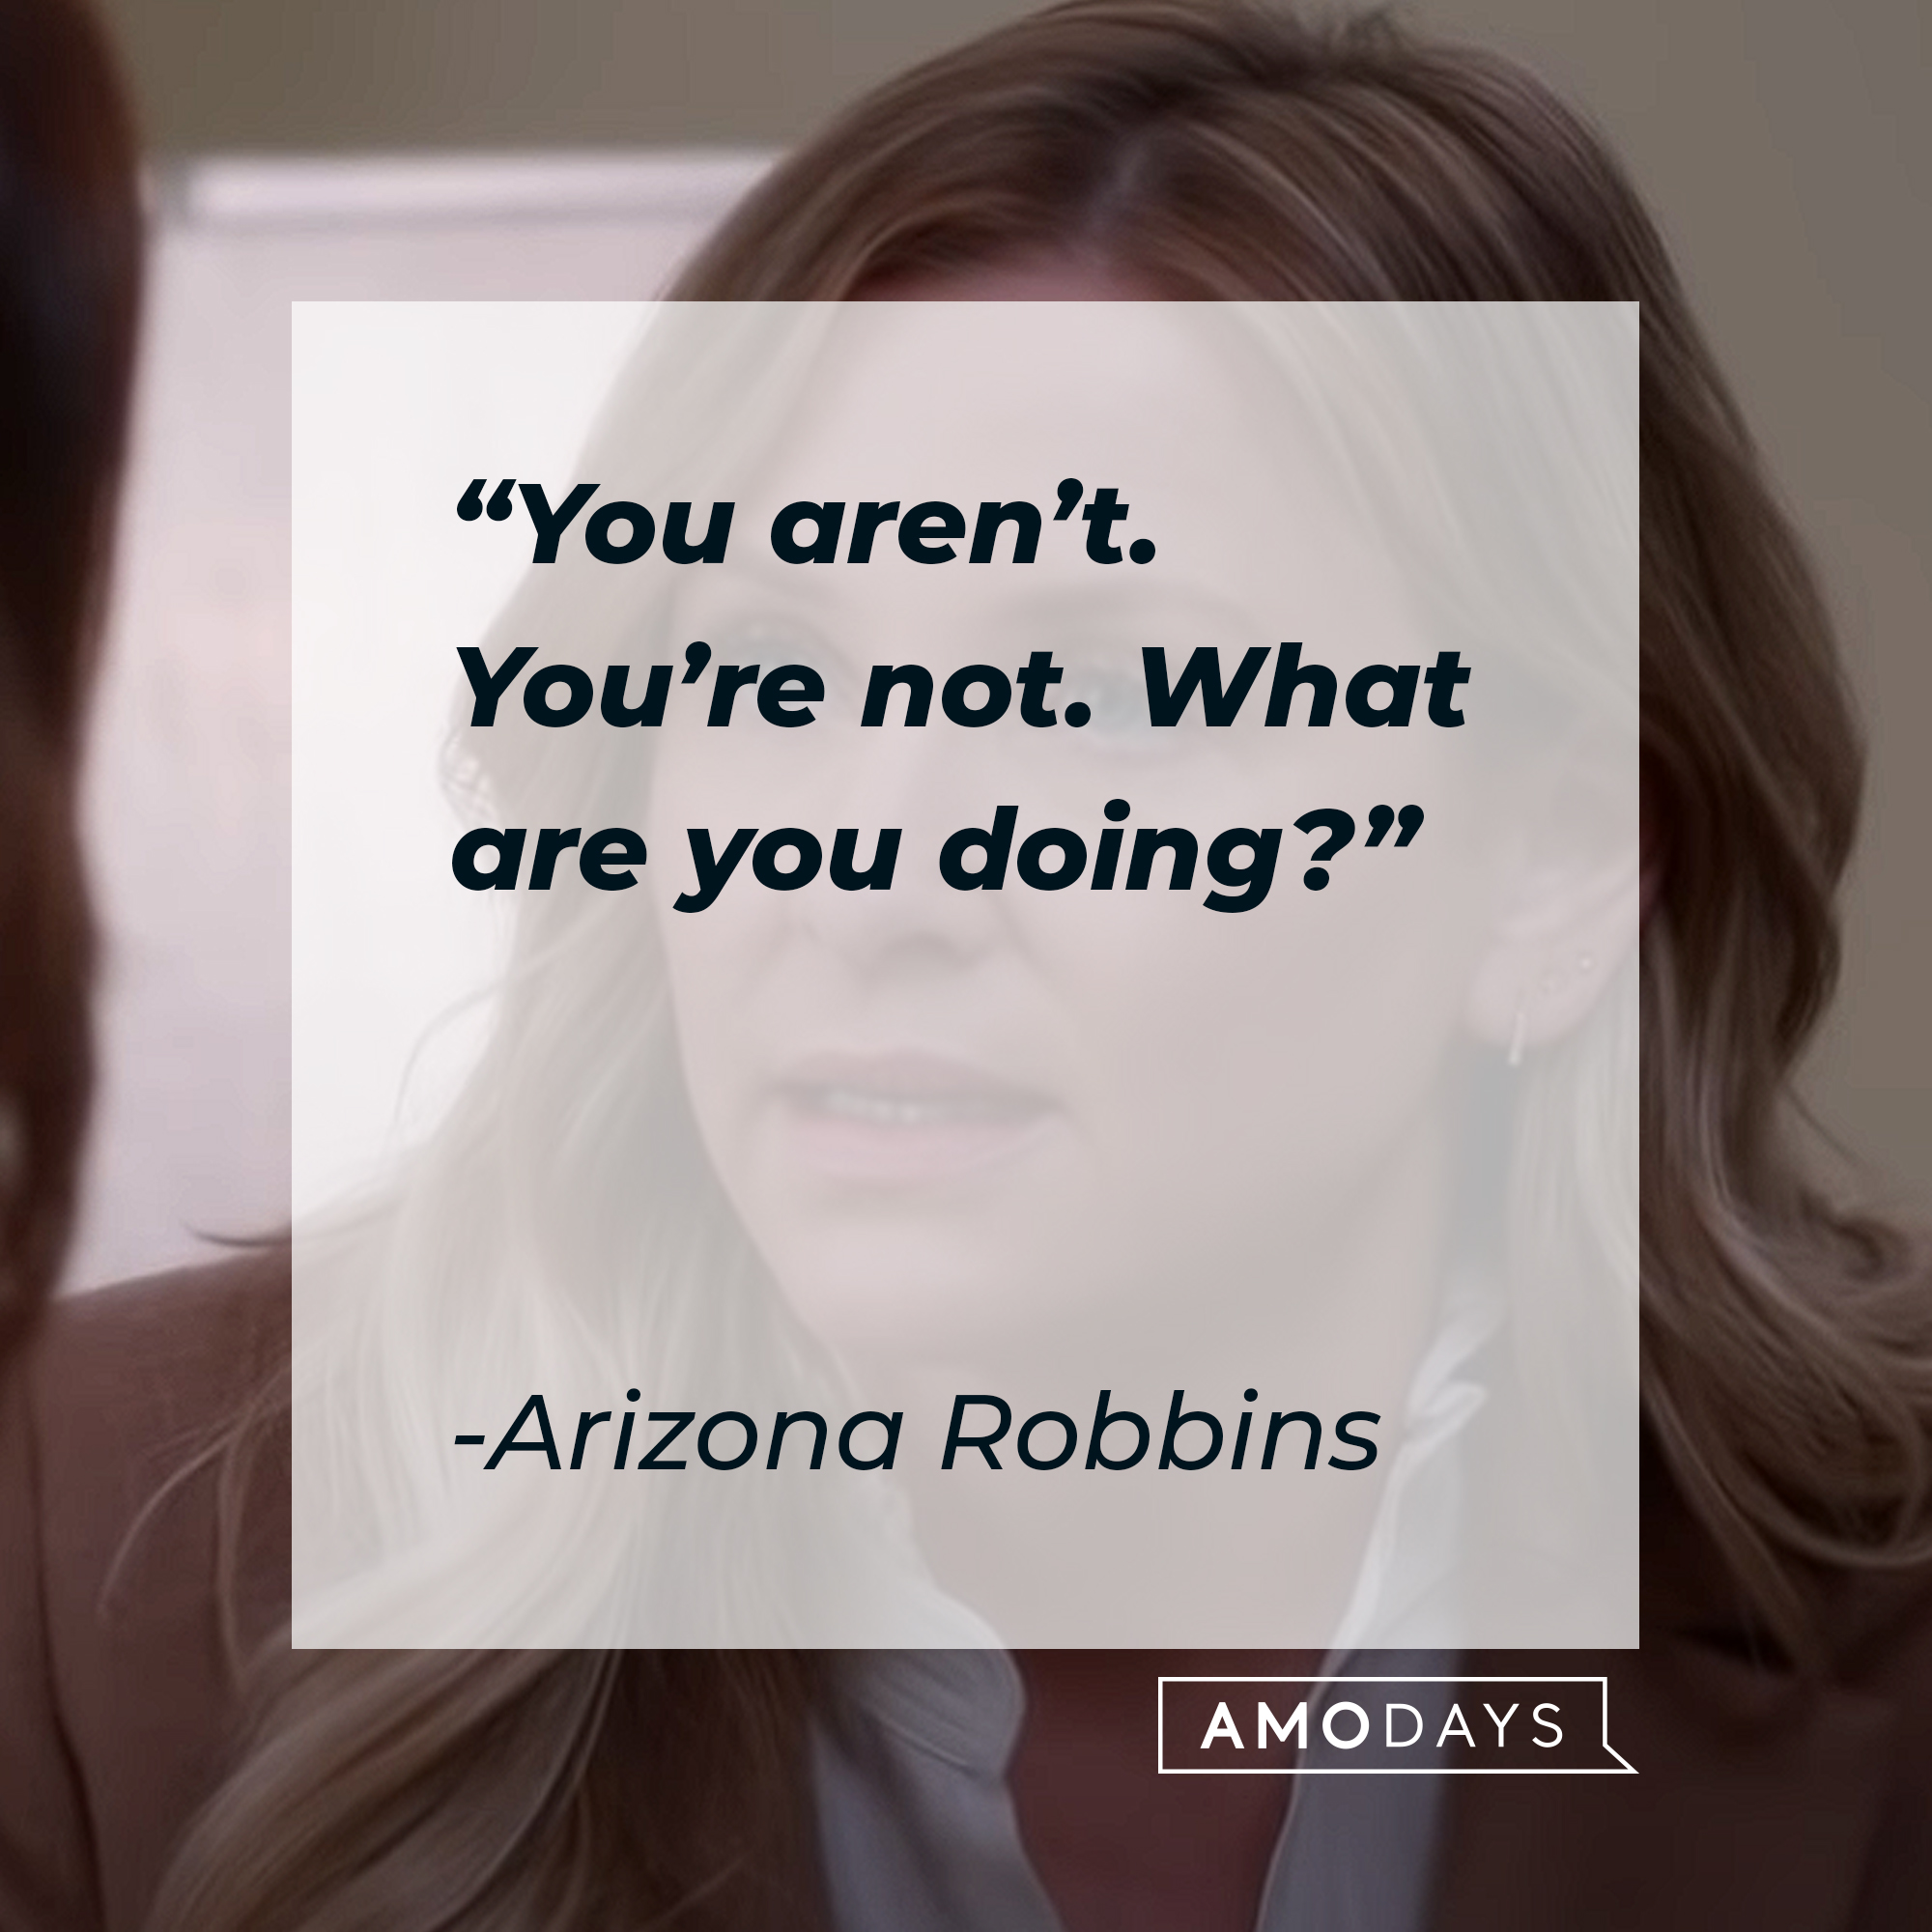 A picture of Arizona Robbins with her quote: “You aren’t. You’re not. What are you doing?” | Image: AmoDays